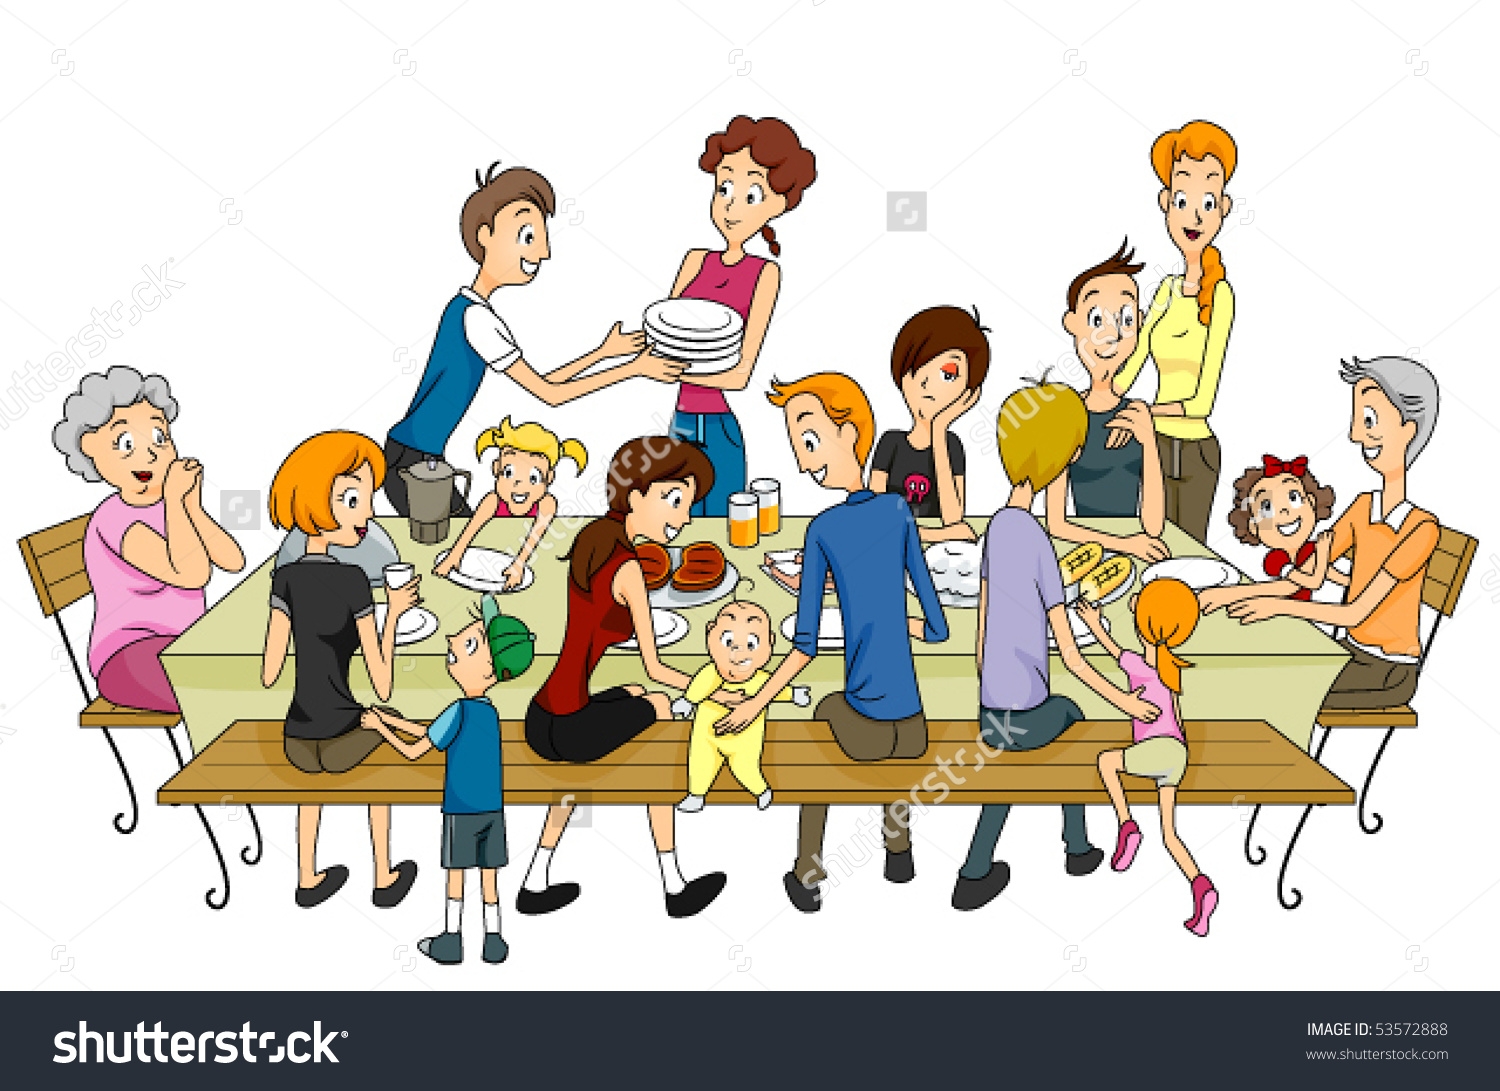 Family Get Together Clipart.